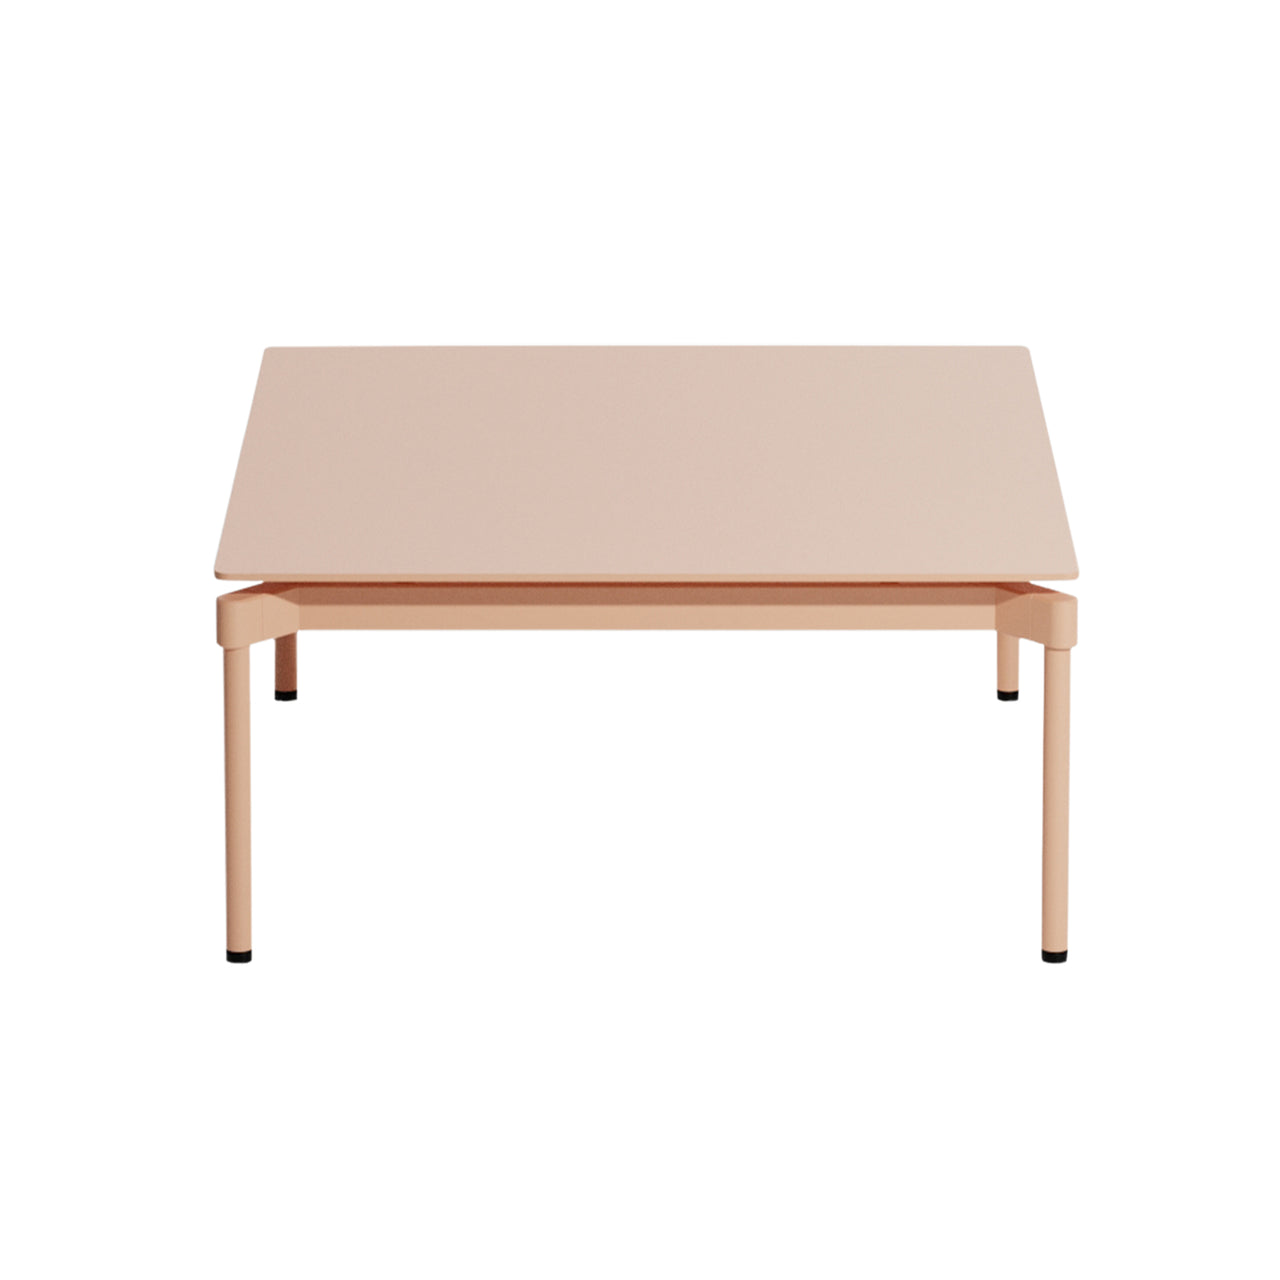 Fromme Coffee Table: Blush